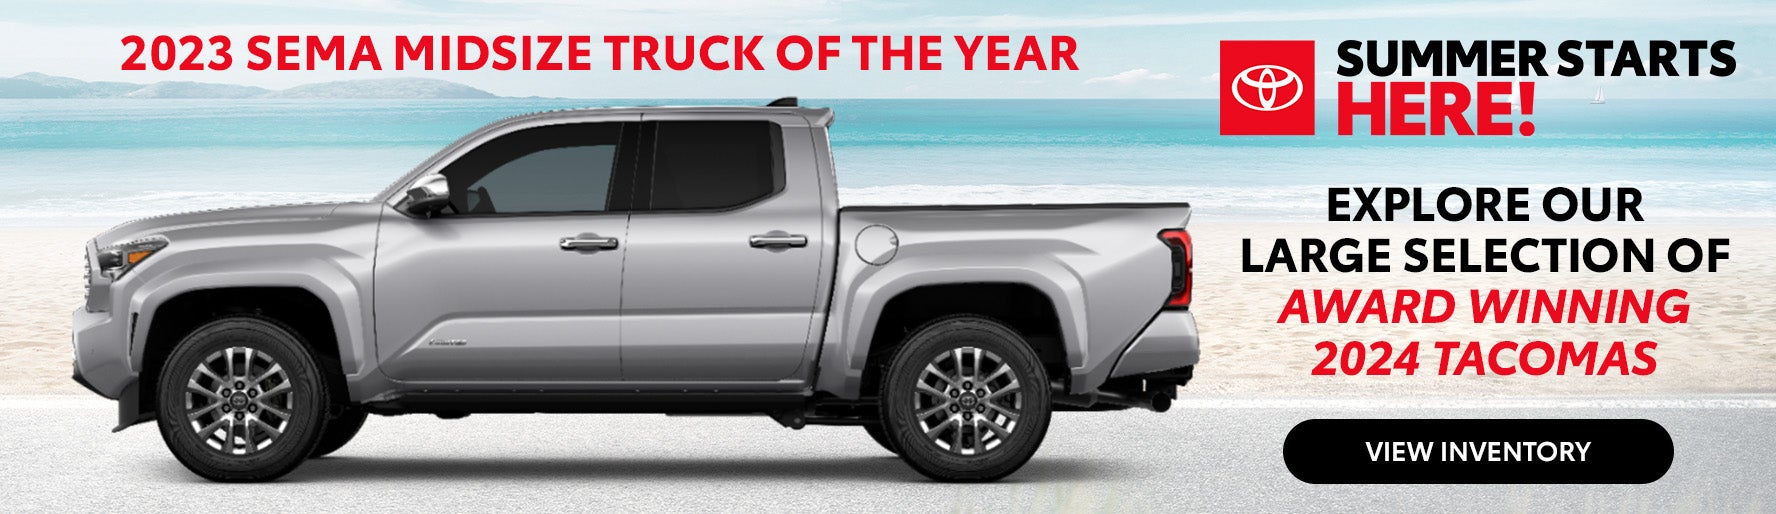 Explore Our Large Selection of Award Winning 2024 Tacomas